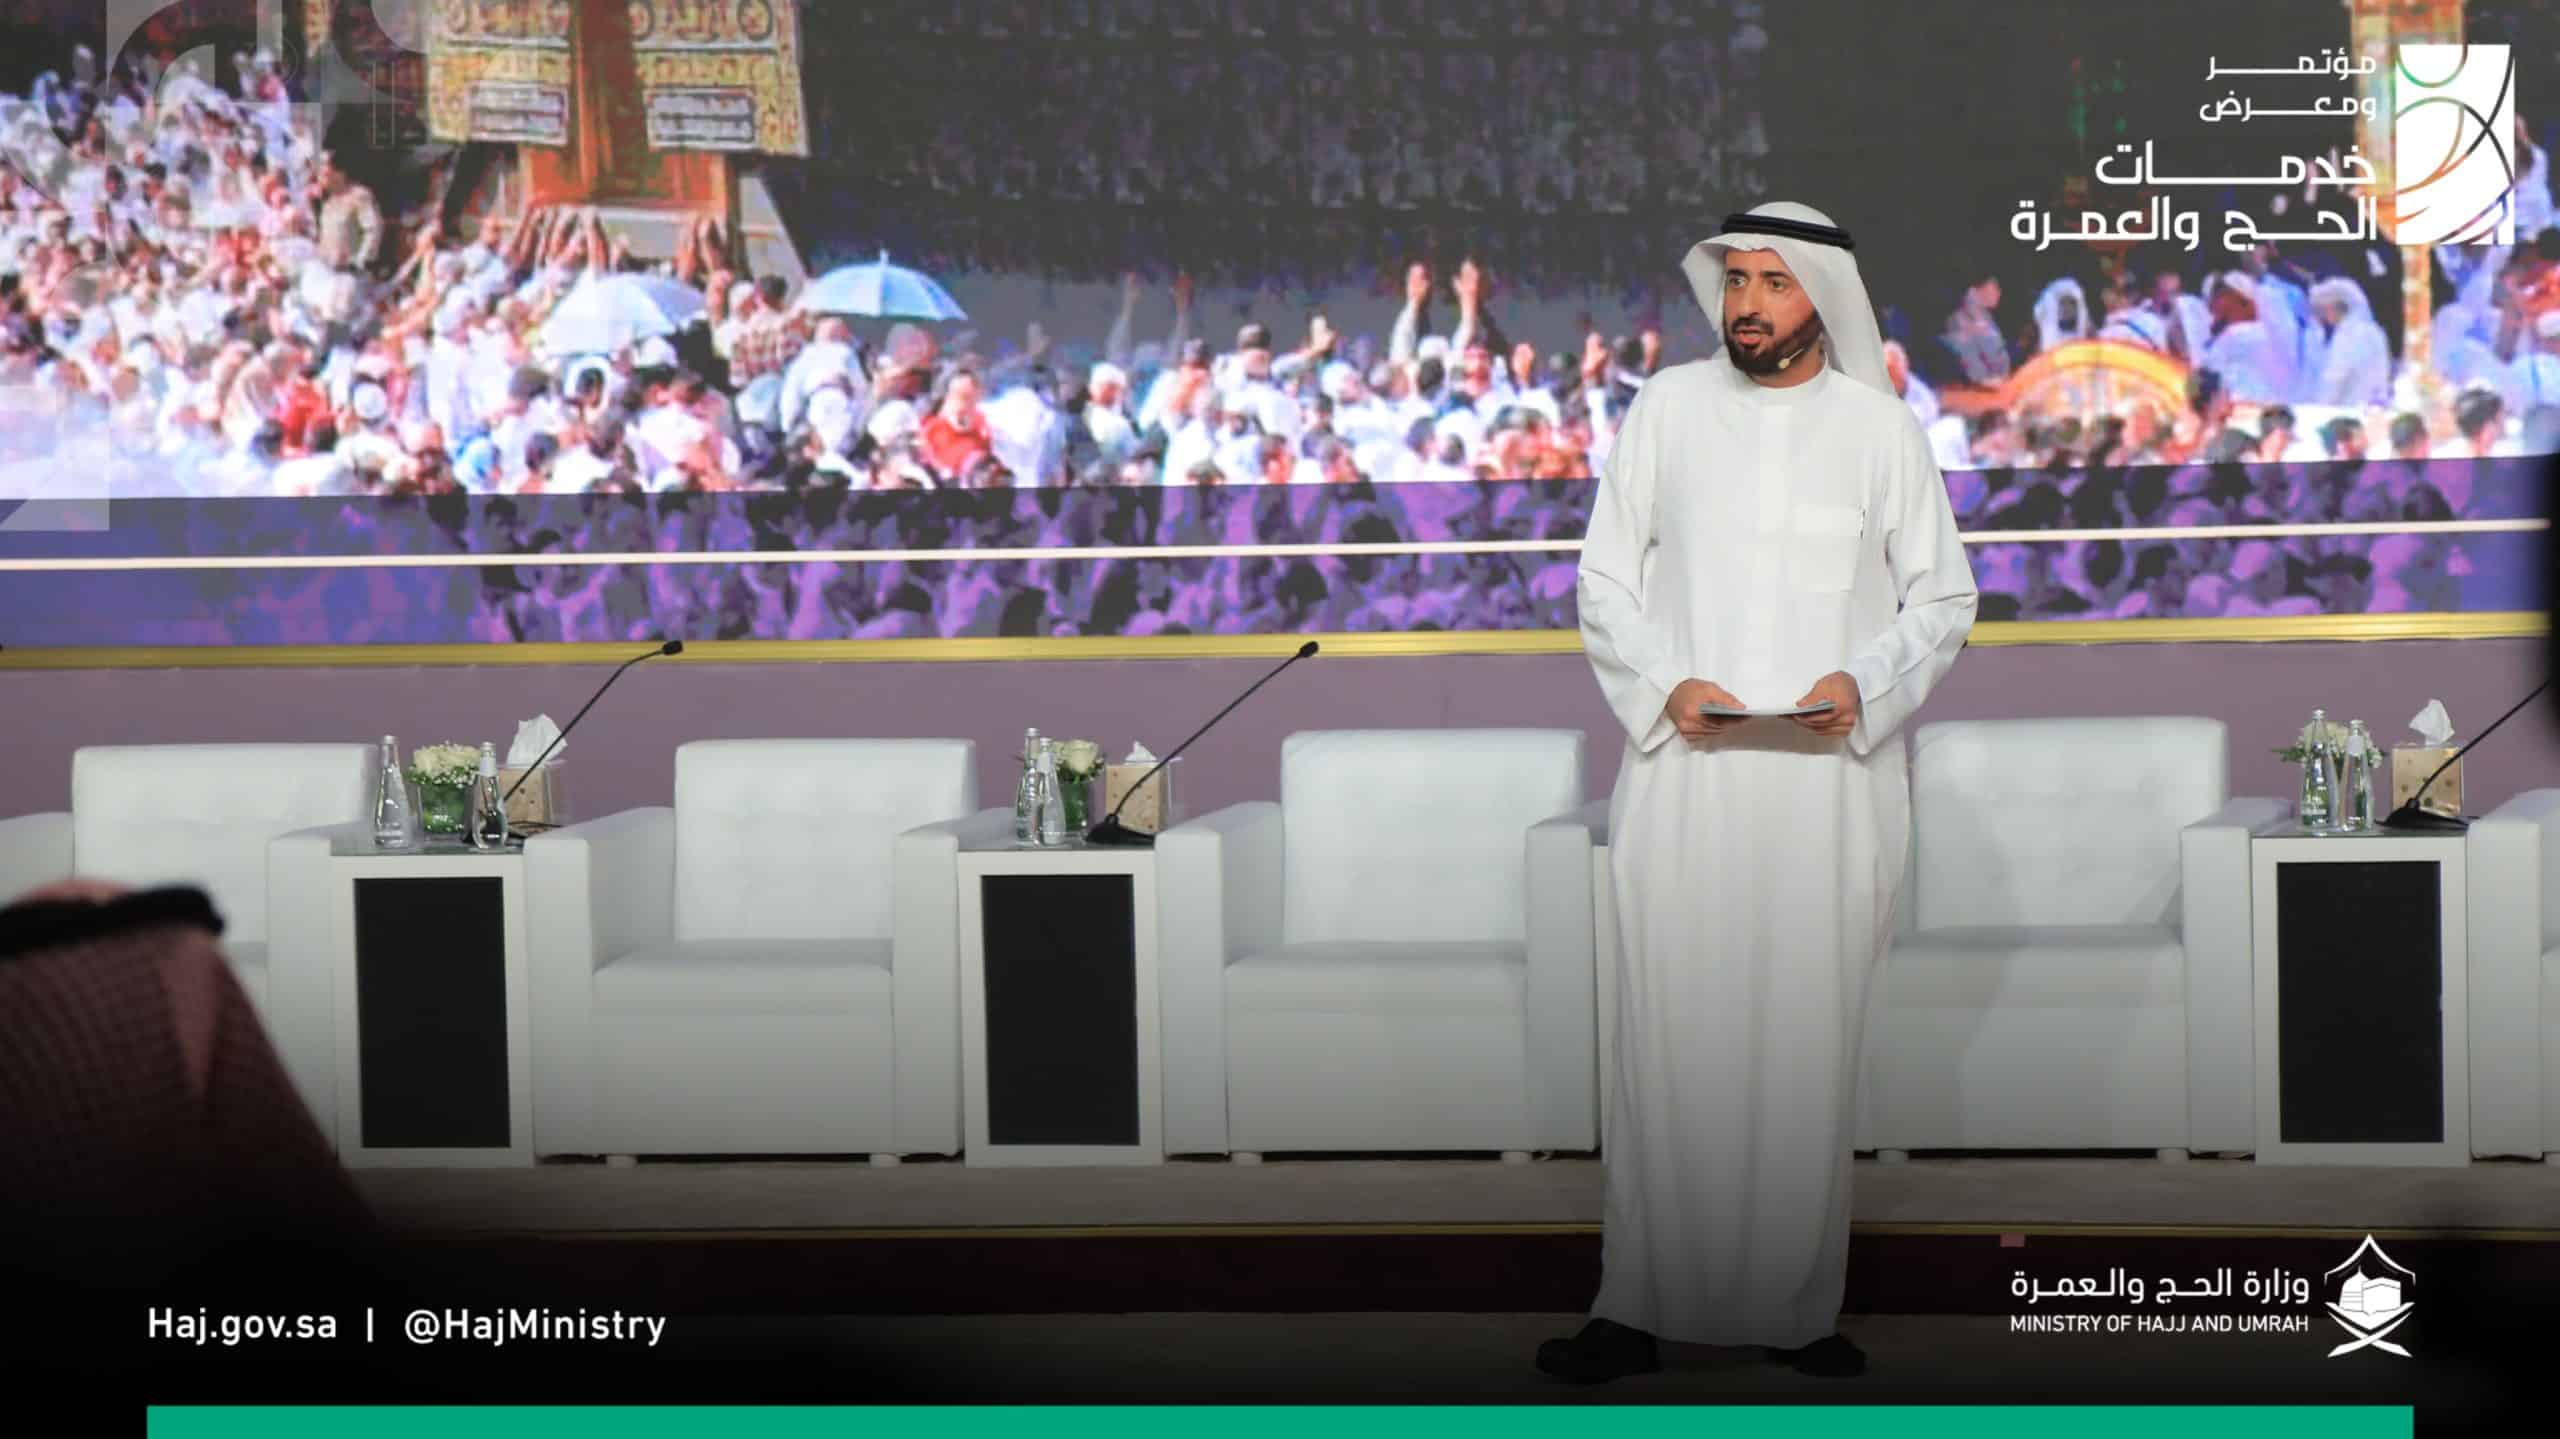 Hajj and Umrah tour operator Mawasim, part of Almosafer - Seera Group’s travel platform, unveiled the new trends in Umrah travel at the 2023 Conference & Exhibition for Hajj and Umrah Services (Hajj Expo).